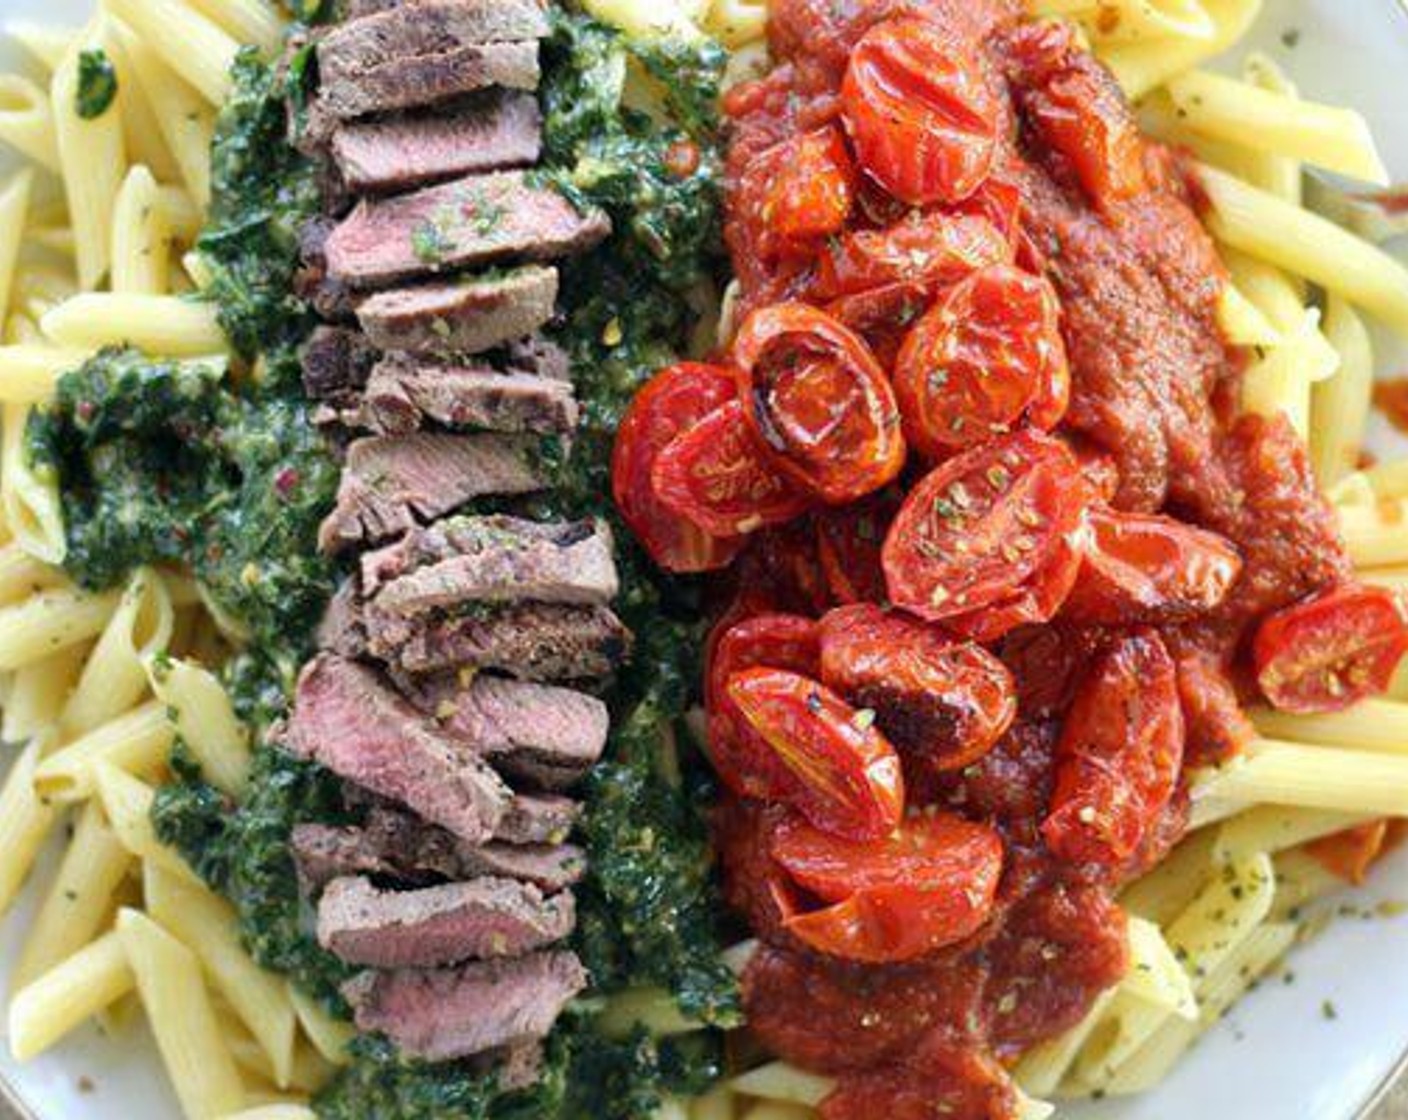 step 6 To plate this dish, place the pasta in a large pasta bowl or serving dish. Spoon the prepared chimichurri sauce on one side of the pasta. Slice the cooked steak and place on top of the sauce. On the other side of the pasta, spoon the heated marinara sauce over the top. Arrange the broiled tomatoes on top.